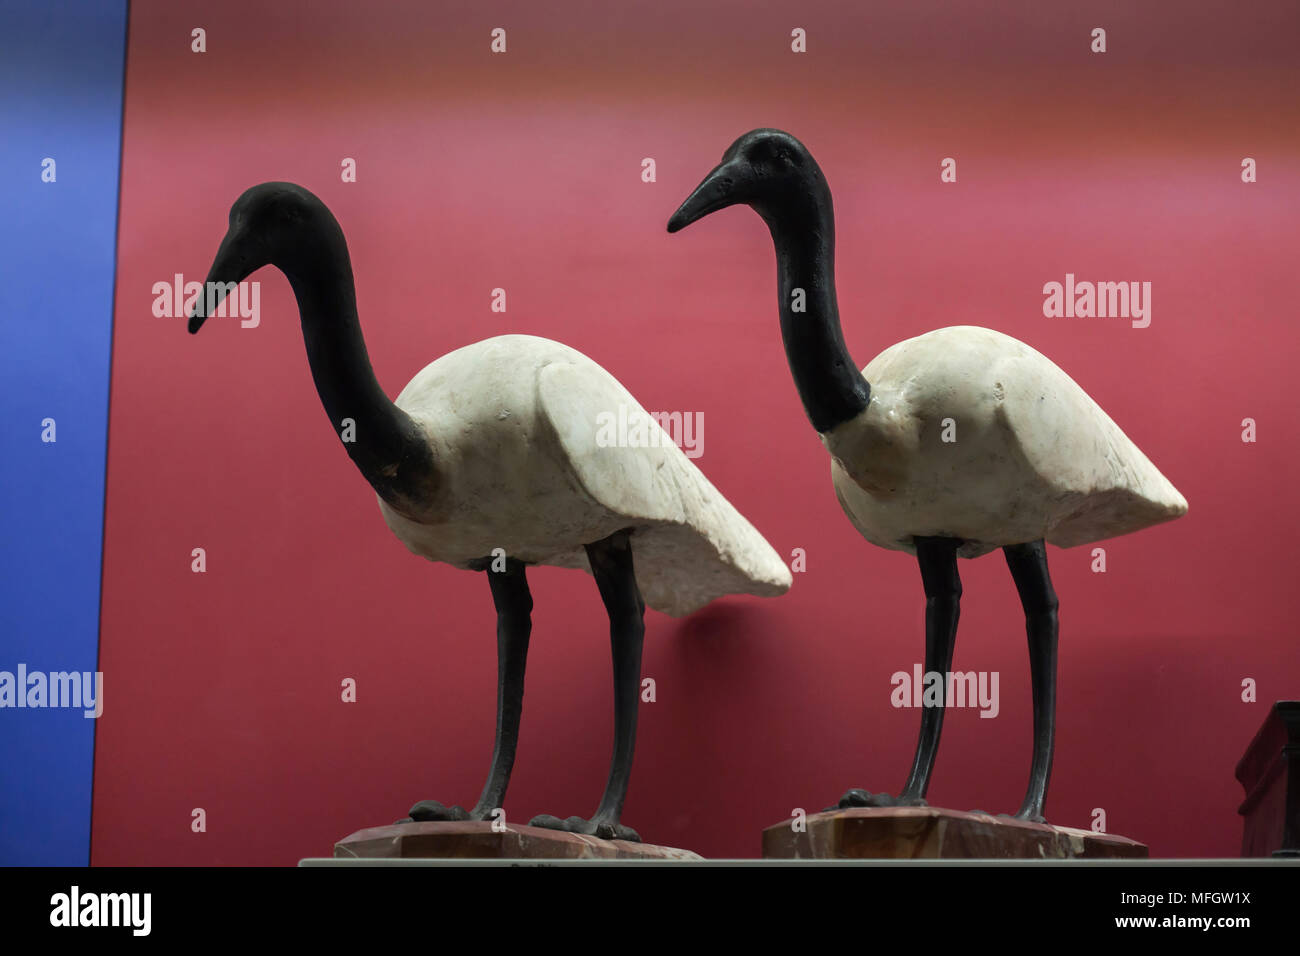 Two sacred ibises dated from the Roman period from the 1st century BC or the 1st century AD found in Pompeii on display in the National Archaeological Museum (Museo Archeologico Nazionale di Napoli) in Naples, Campania, Italy. Stock Photo